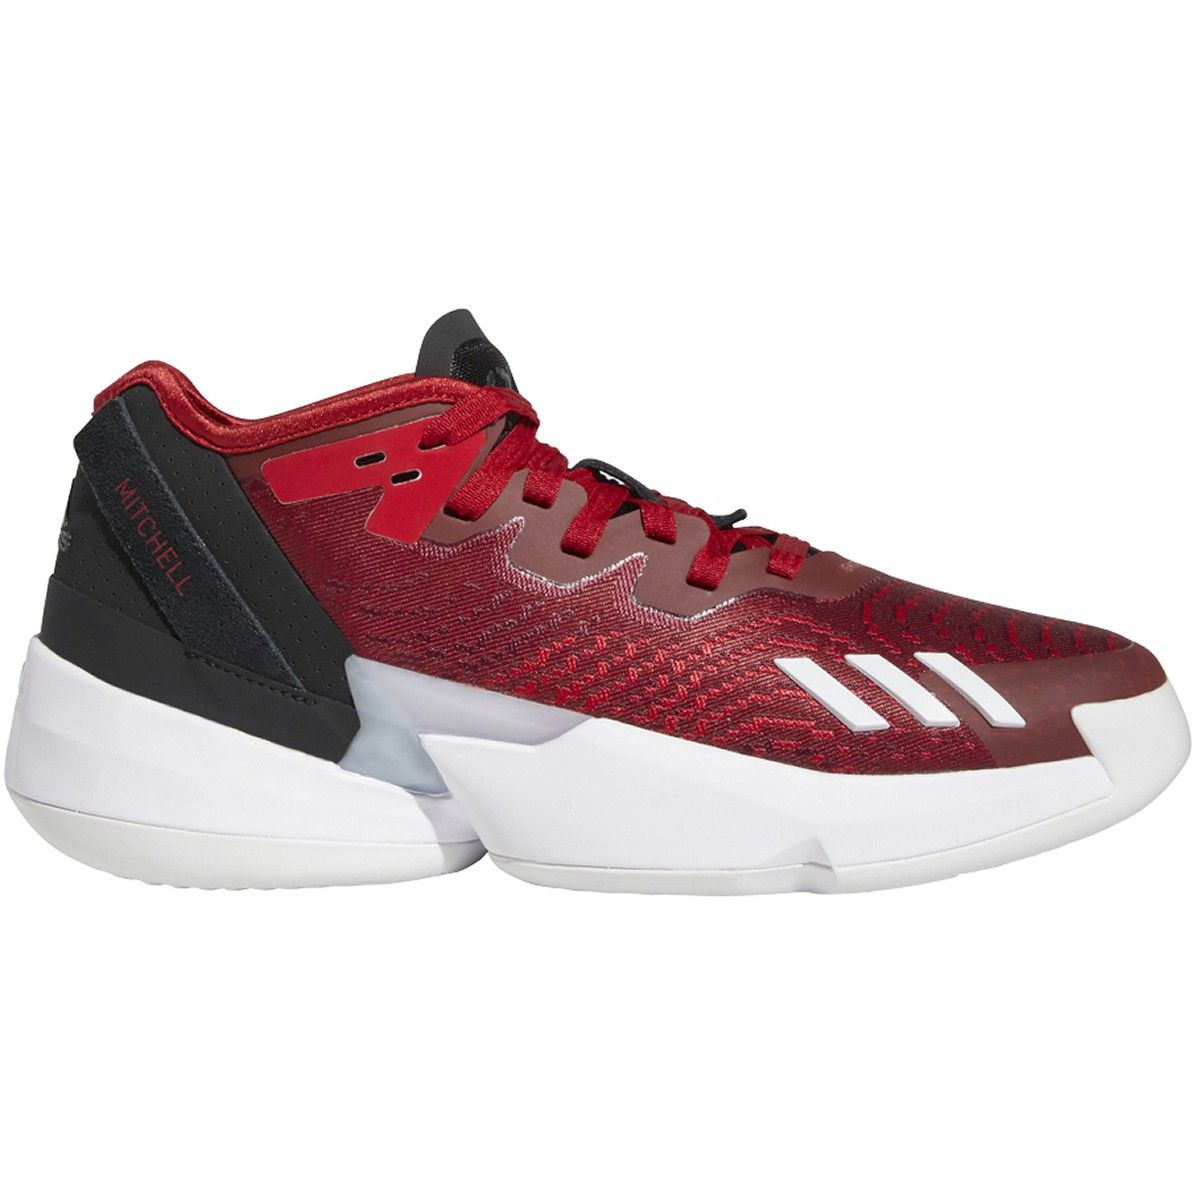 Verrijking dier voorzien adidas D.O.N. Issue 4 - Donovan Mitchell Basketball Shoes in Red | GY6507